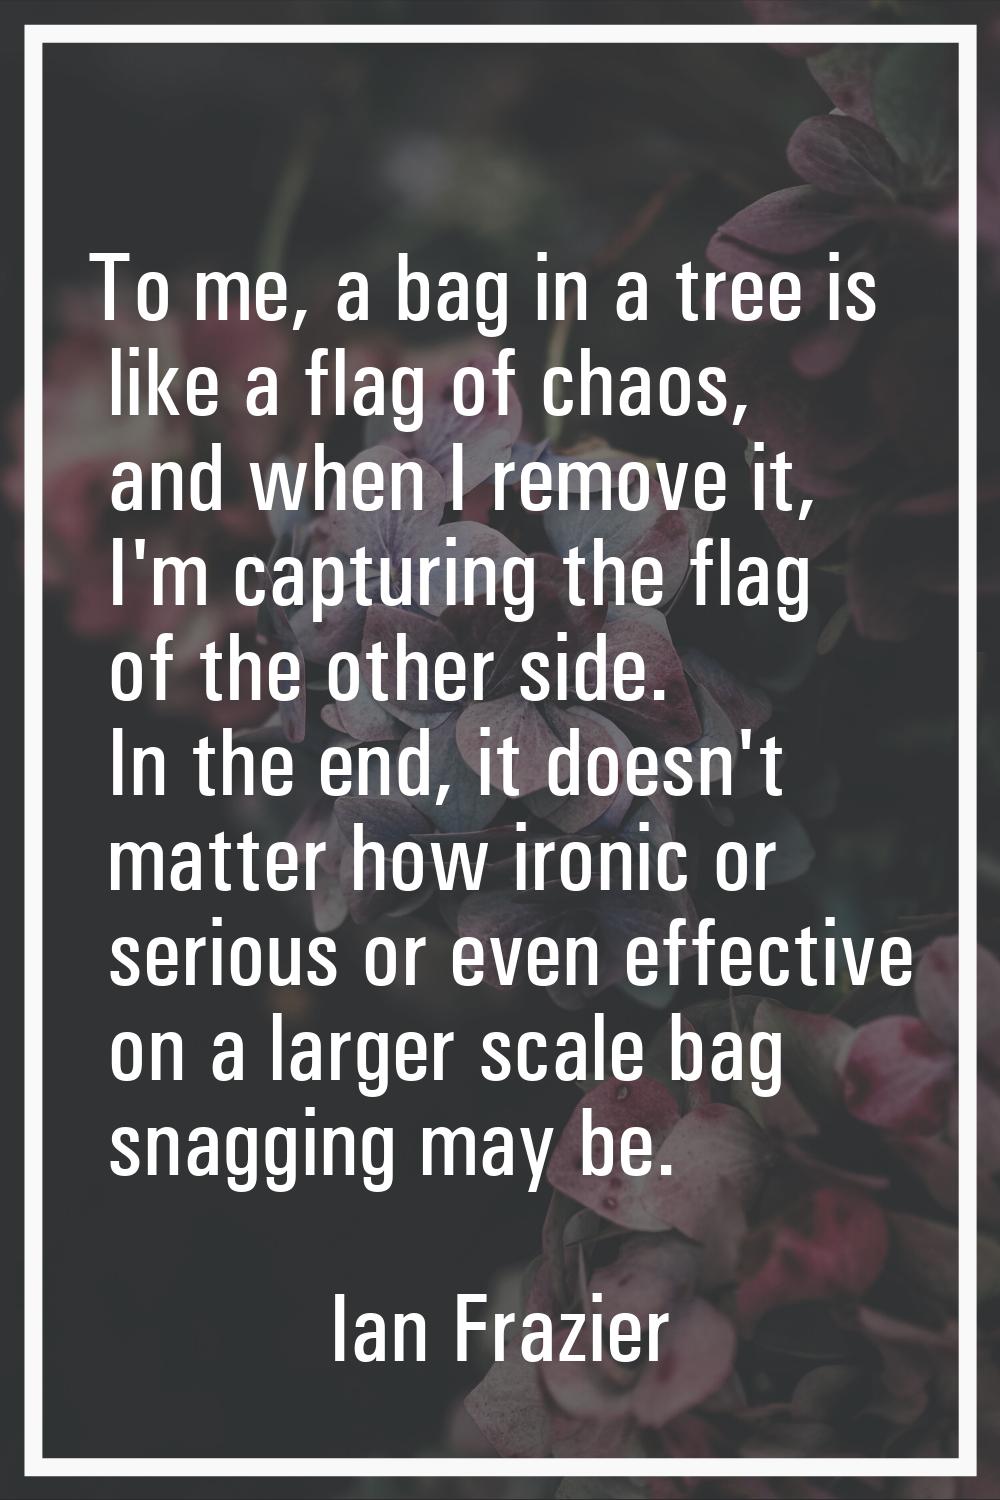 To me, a bag in a tree is like a flag of chaos, and when I remove it, I'm capturing the flag of the